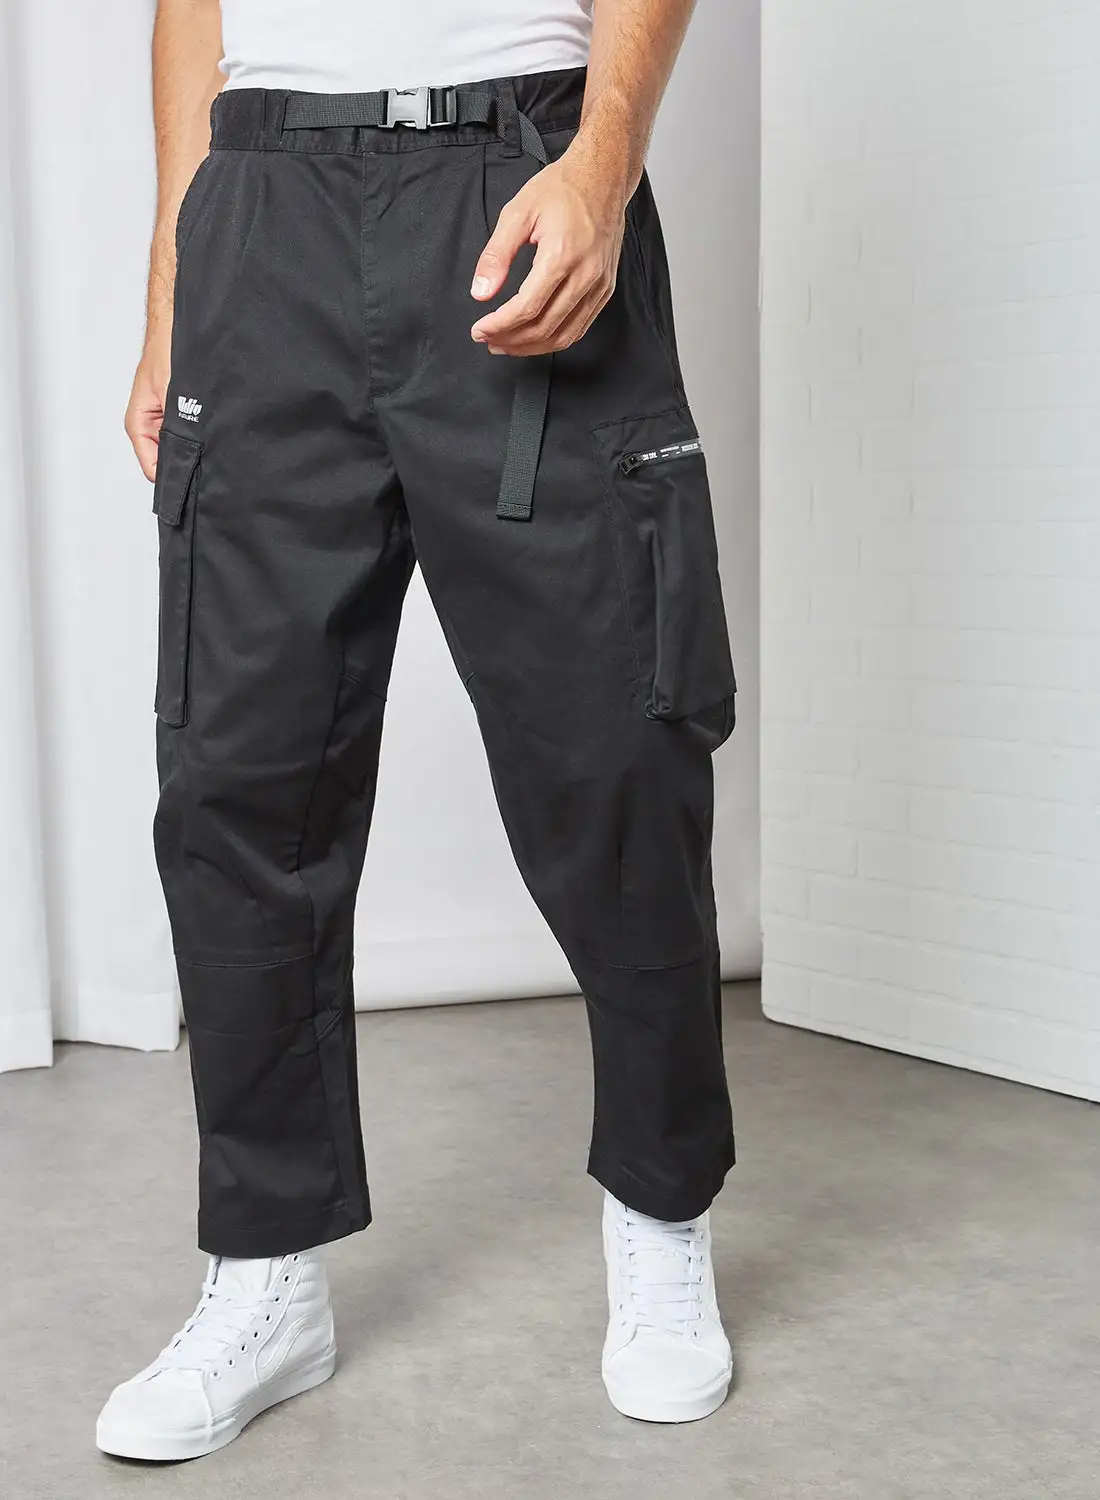 MUSIUM DIV. Woven Relaxed Fit Pants Black